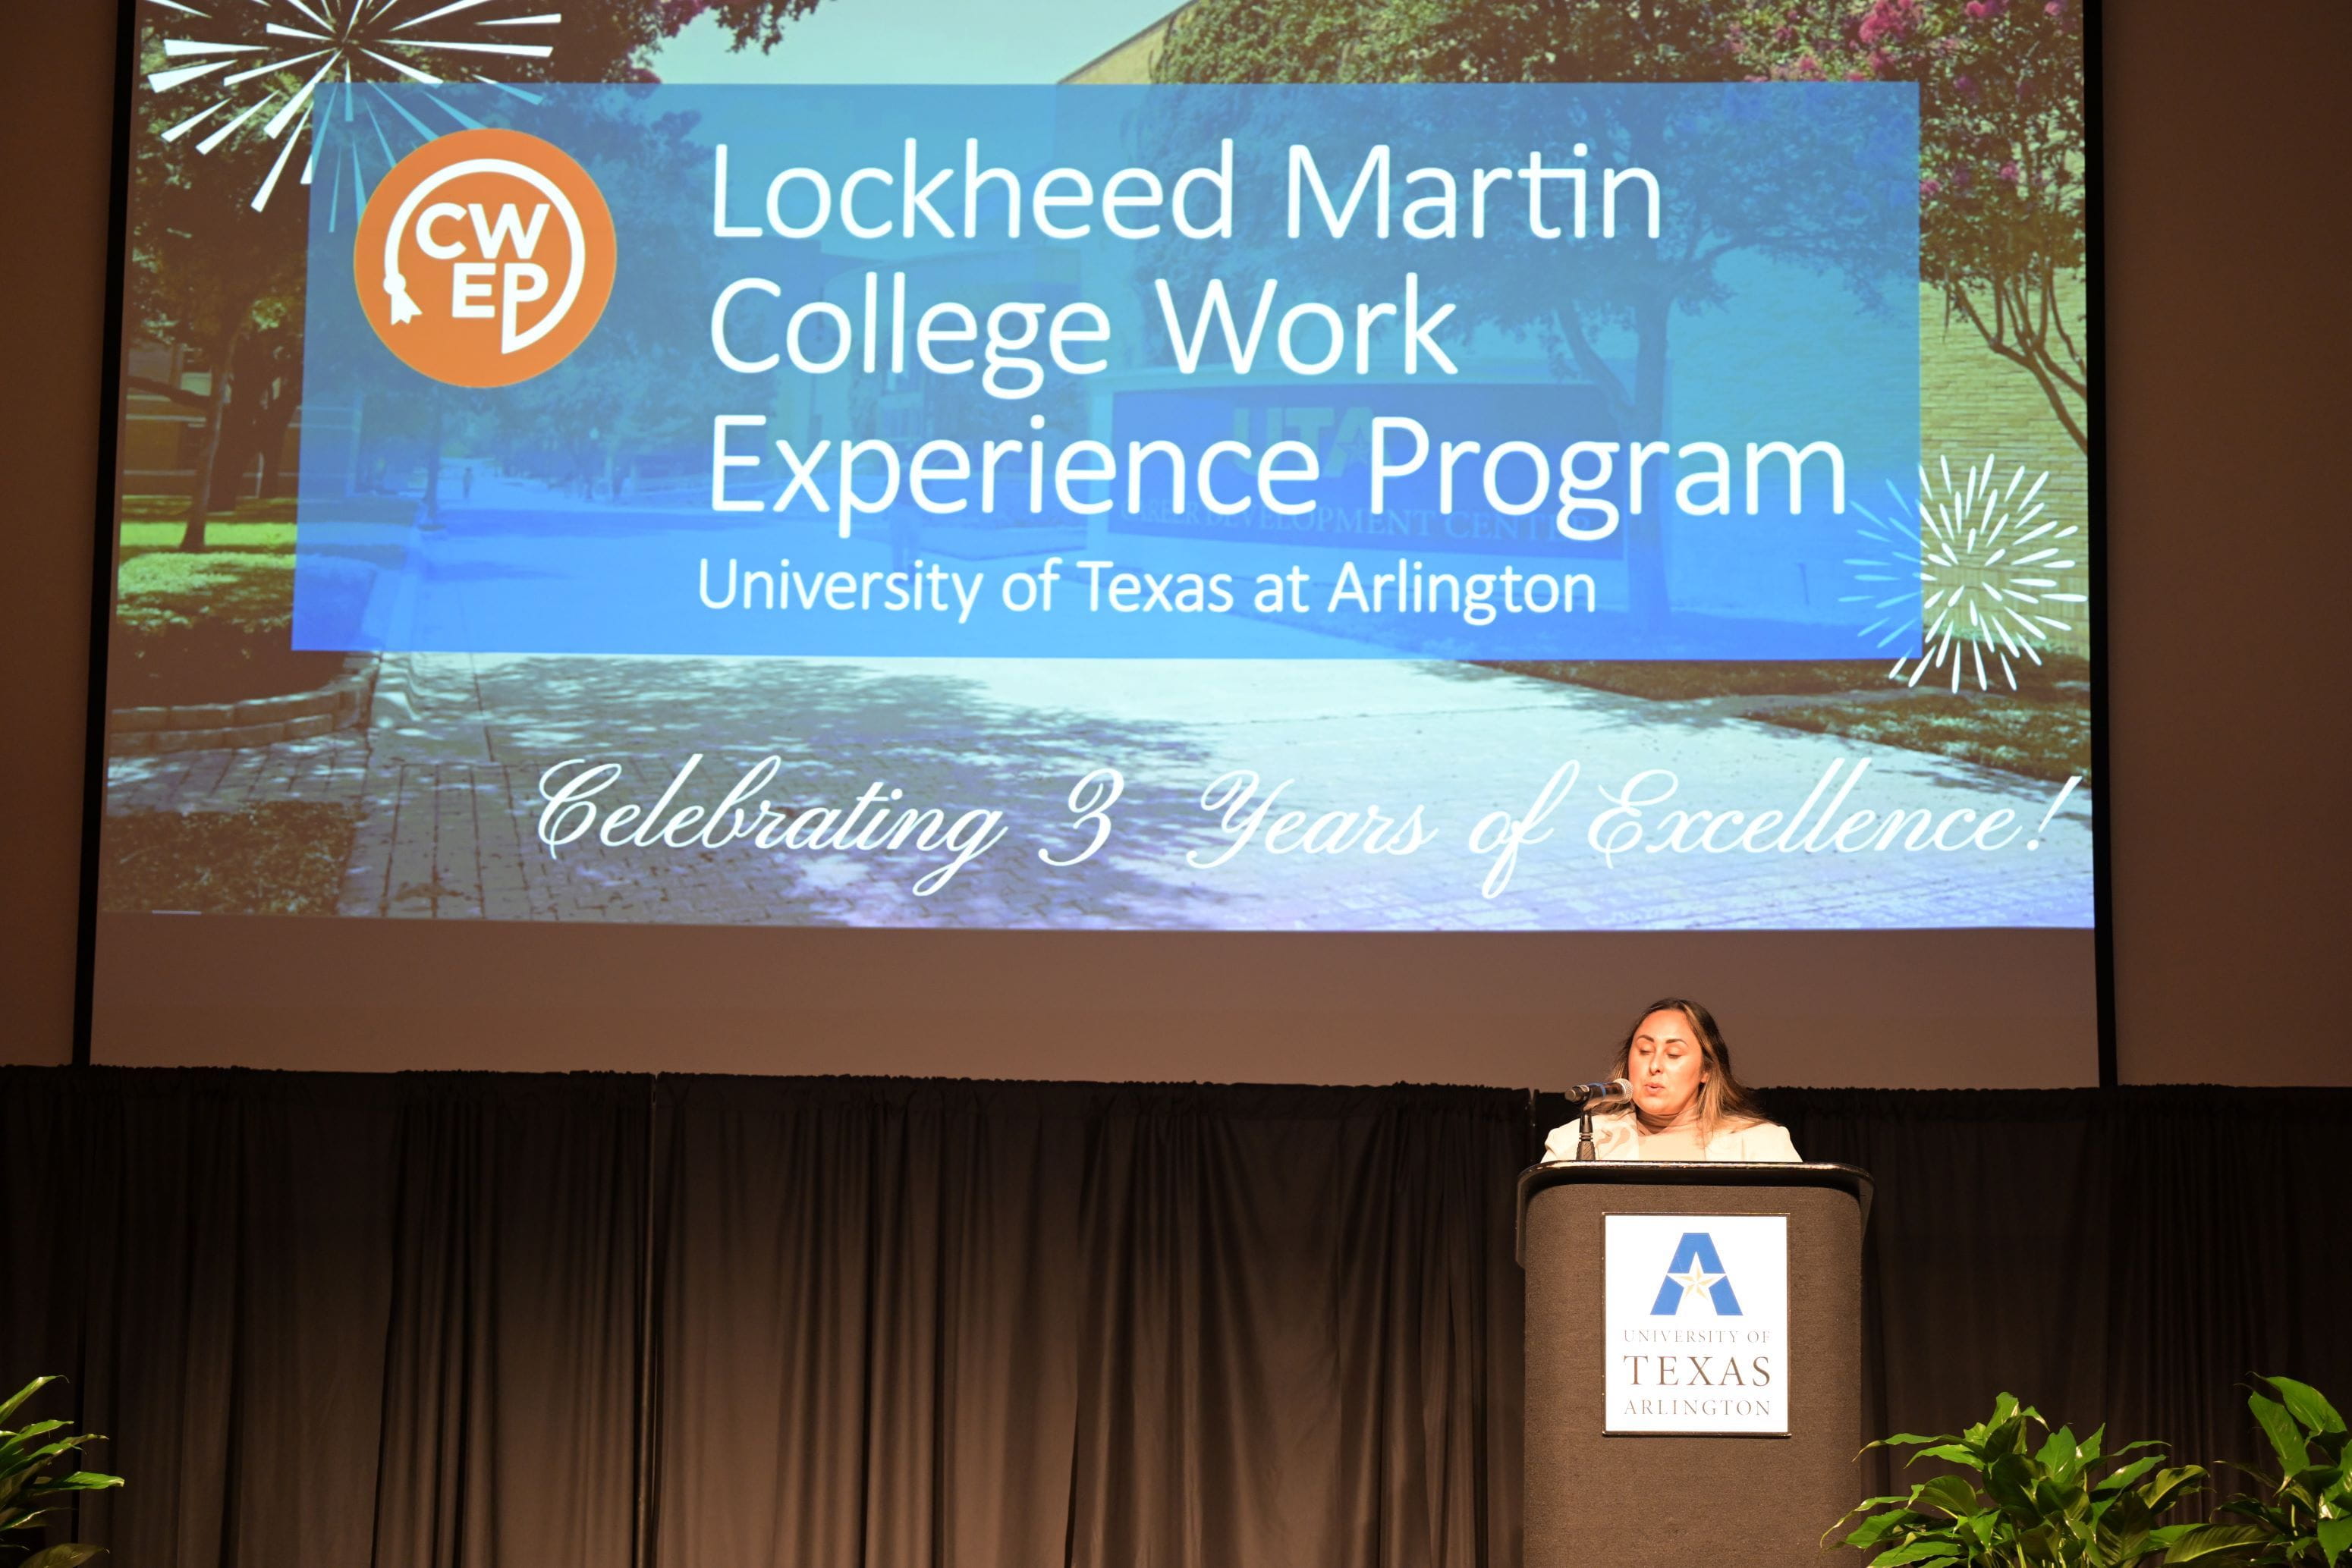 The College Work Experience Program event featured several students who participate in the UTA/Lockheed Martin program." _languageinserted="true